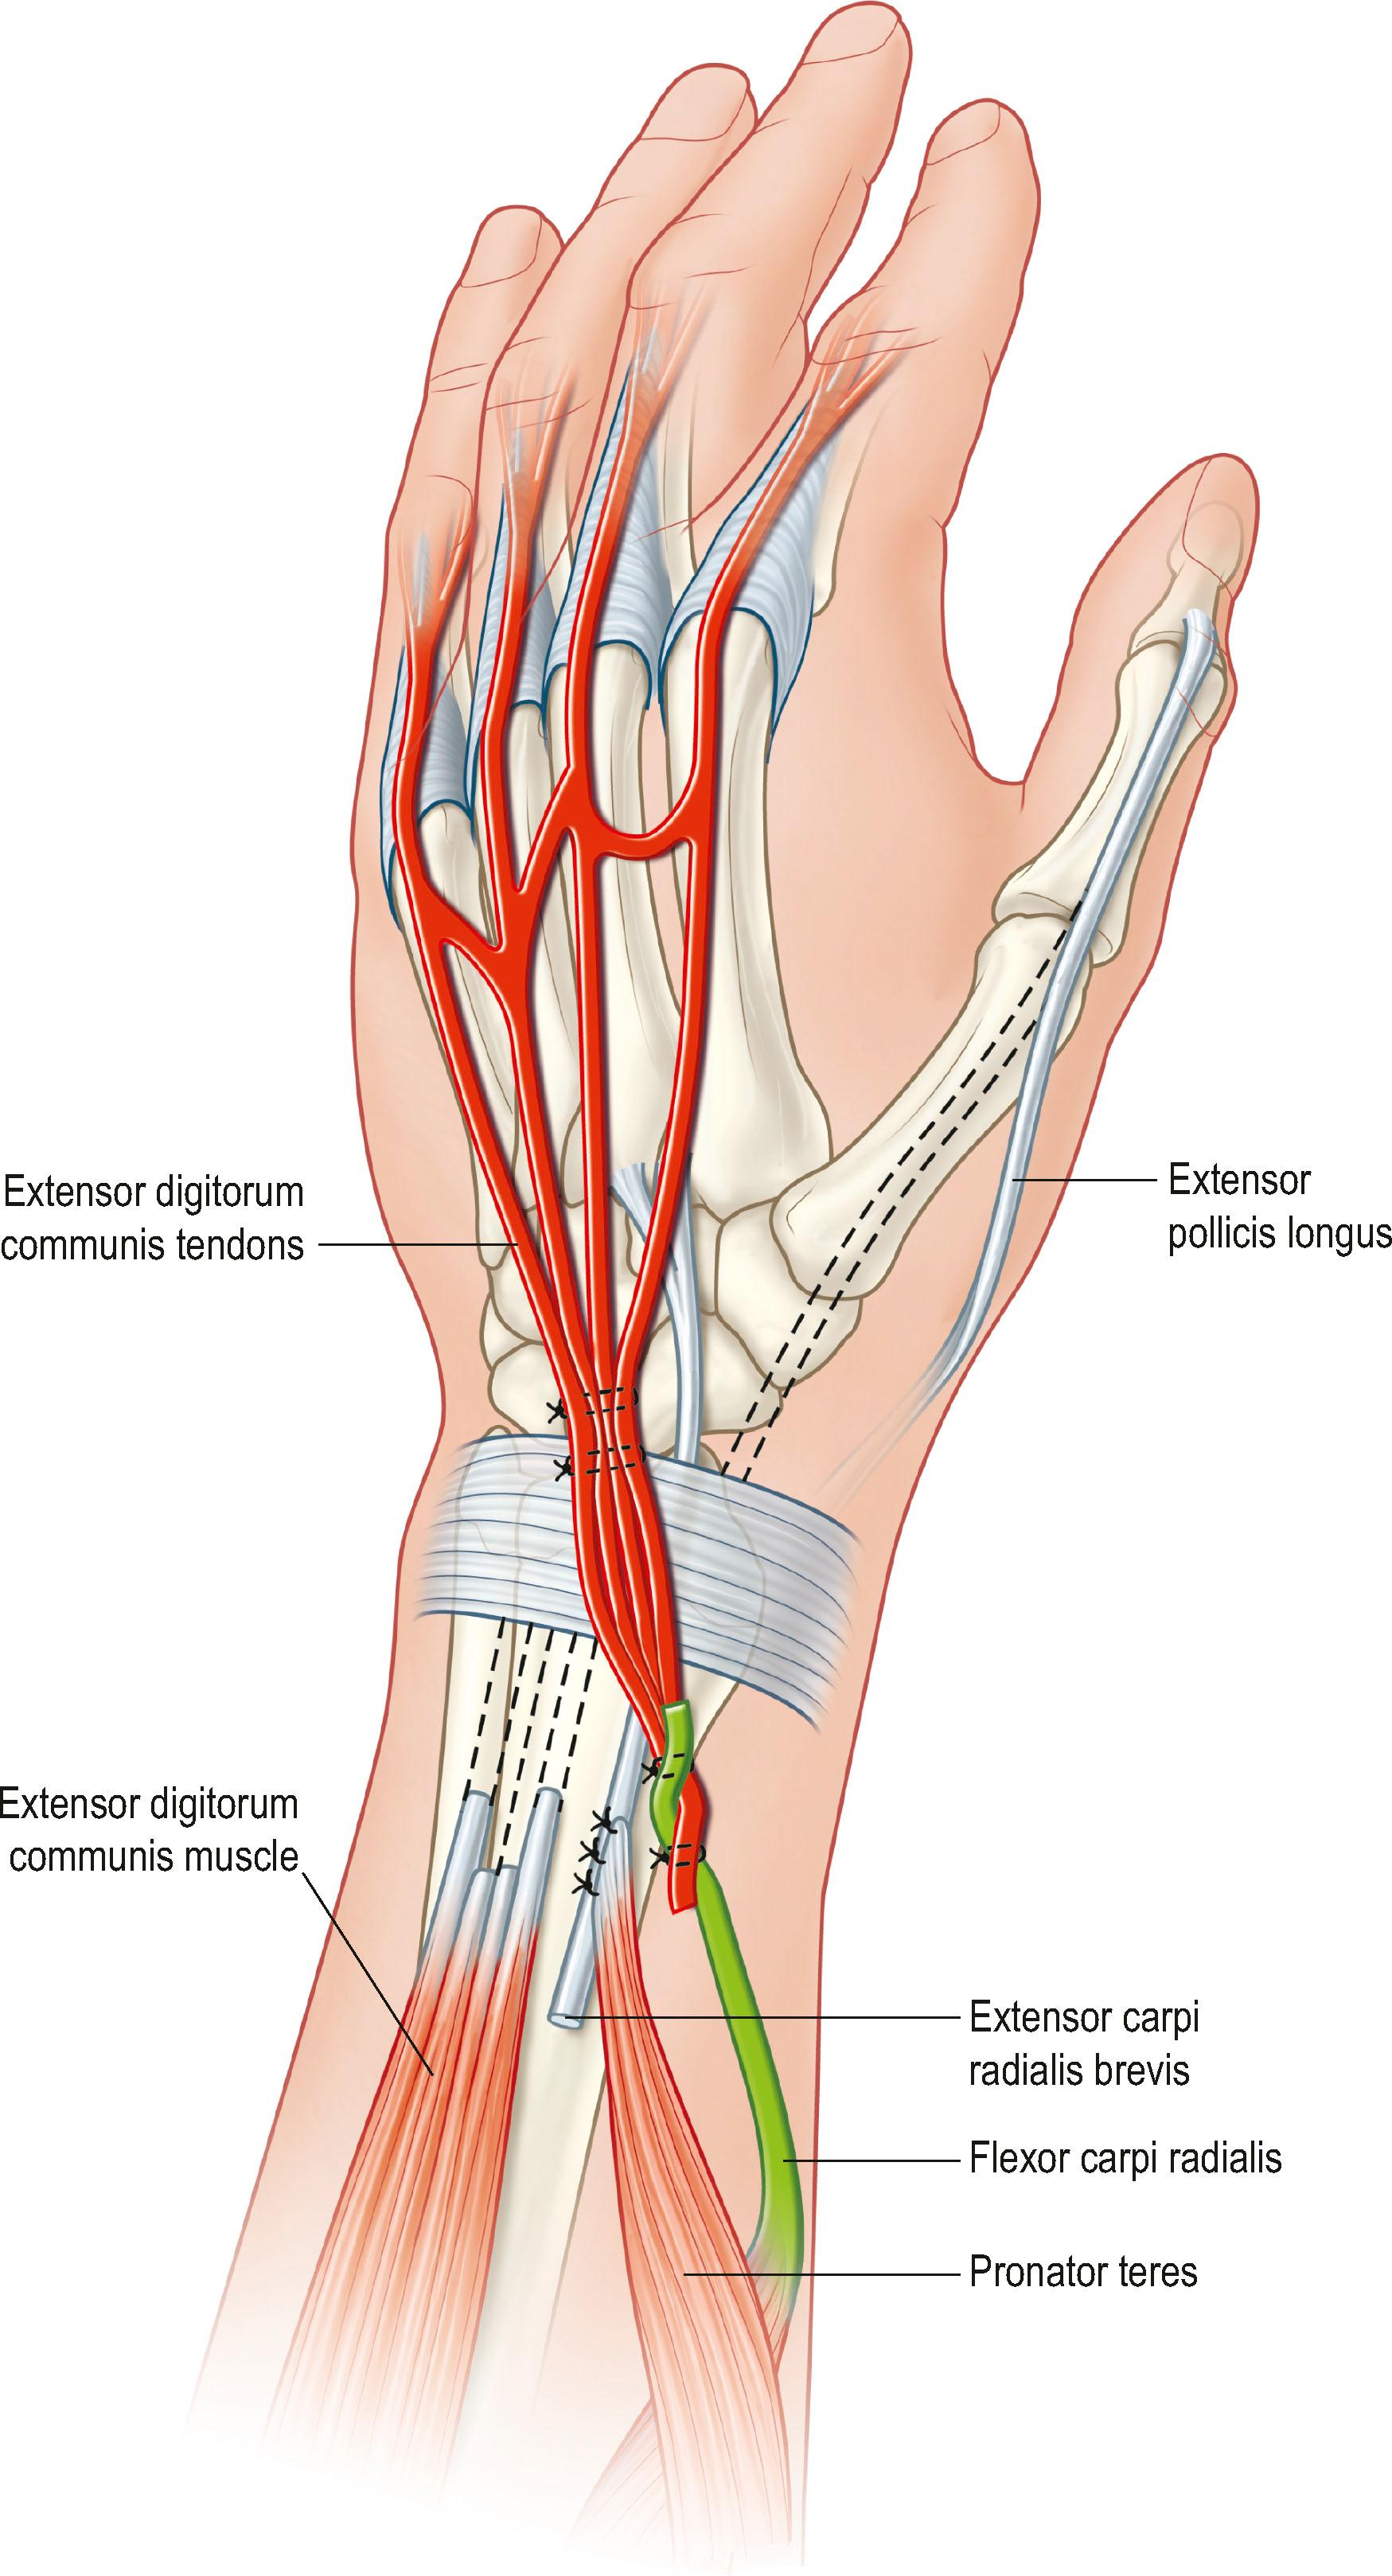 Figure 25.8, Flexor carpi radialis transfer to the combined tendons of extensor digitorum communis. The tendon juncture may have to lie superficial to the extensor retinaculum. Tendon transfers of pronator teres to extensor carpi radialis brevis and palmaris longus to extensor pollicis longus are the same as in the flexor carpi ulnaris transfers.